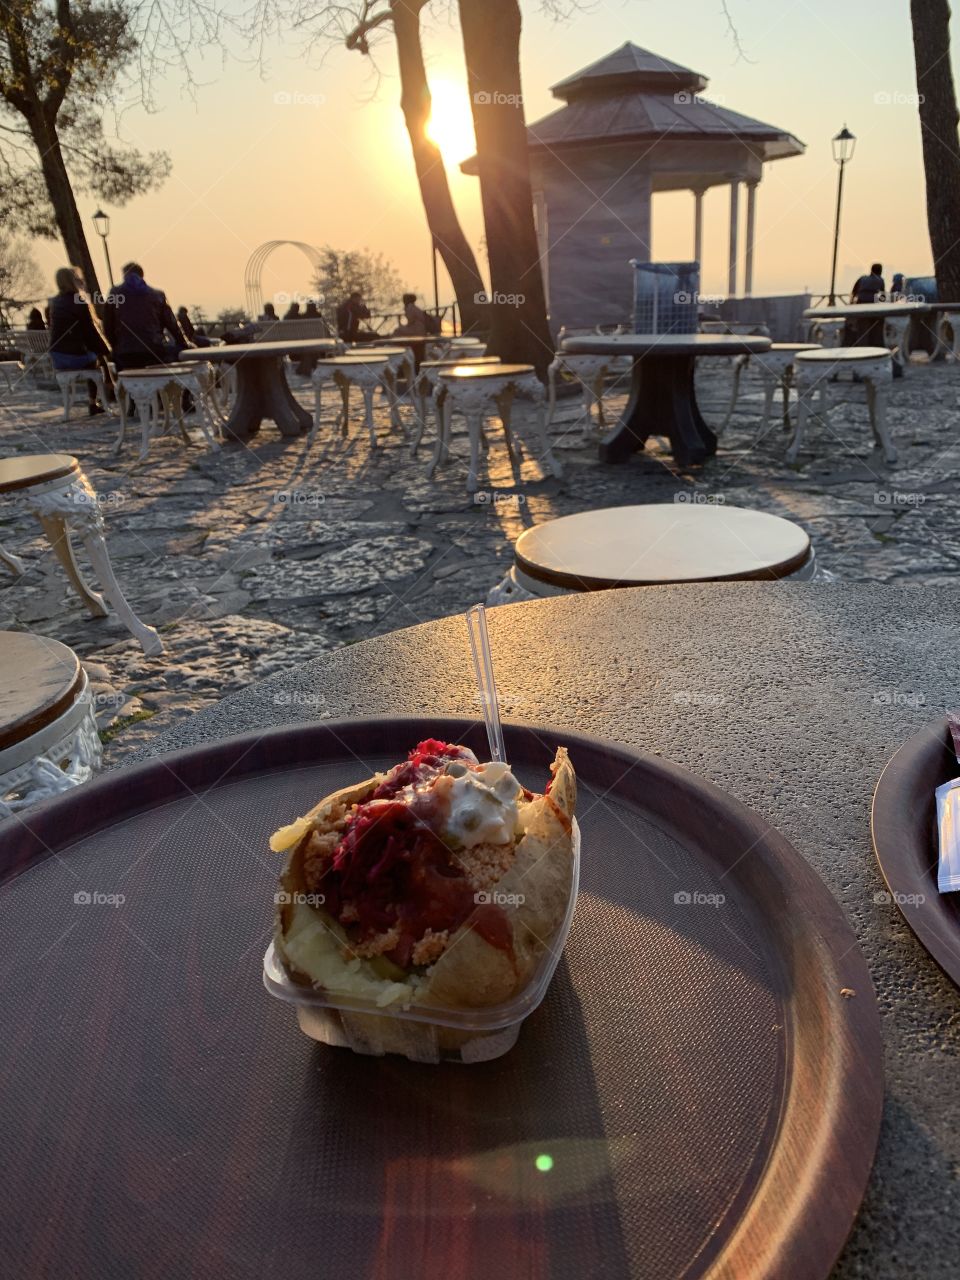 Foodie with nice sunset view!